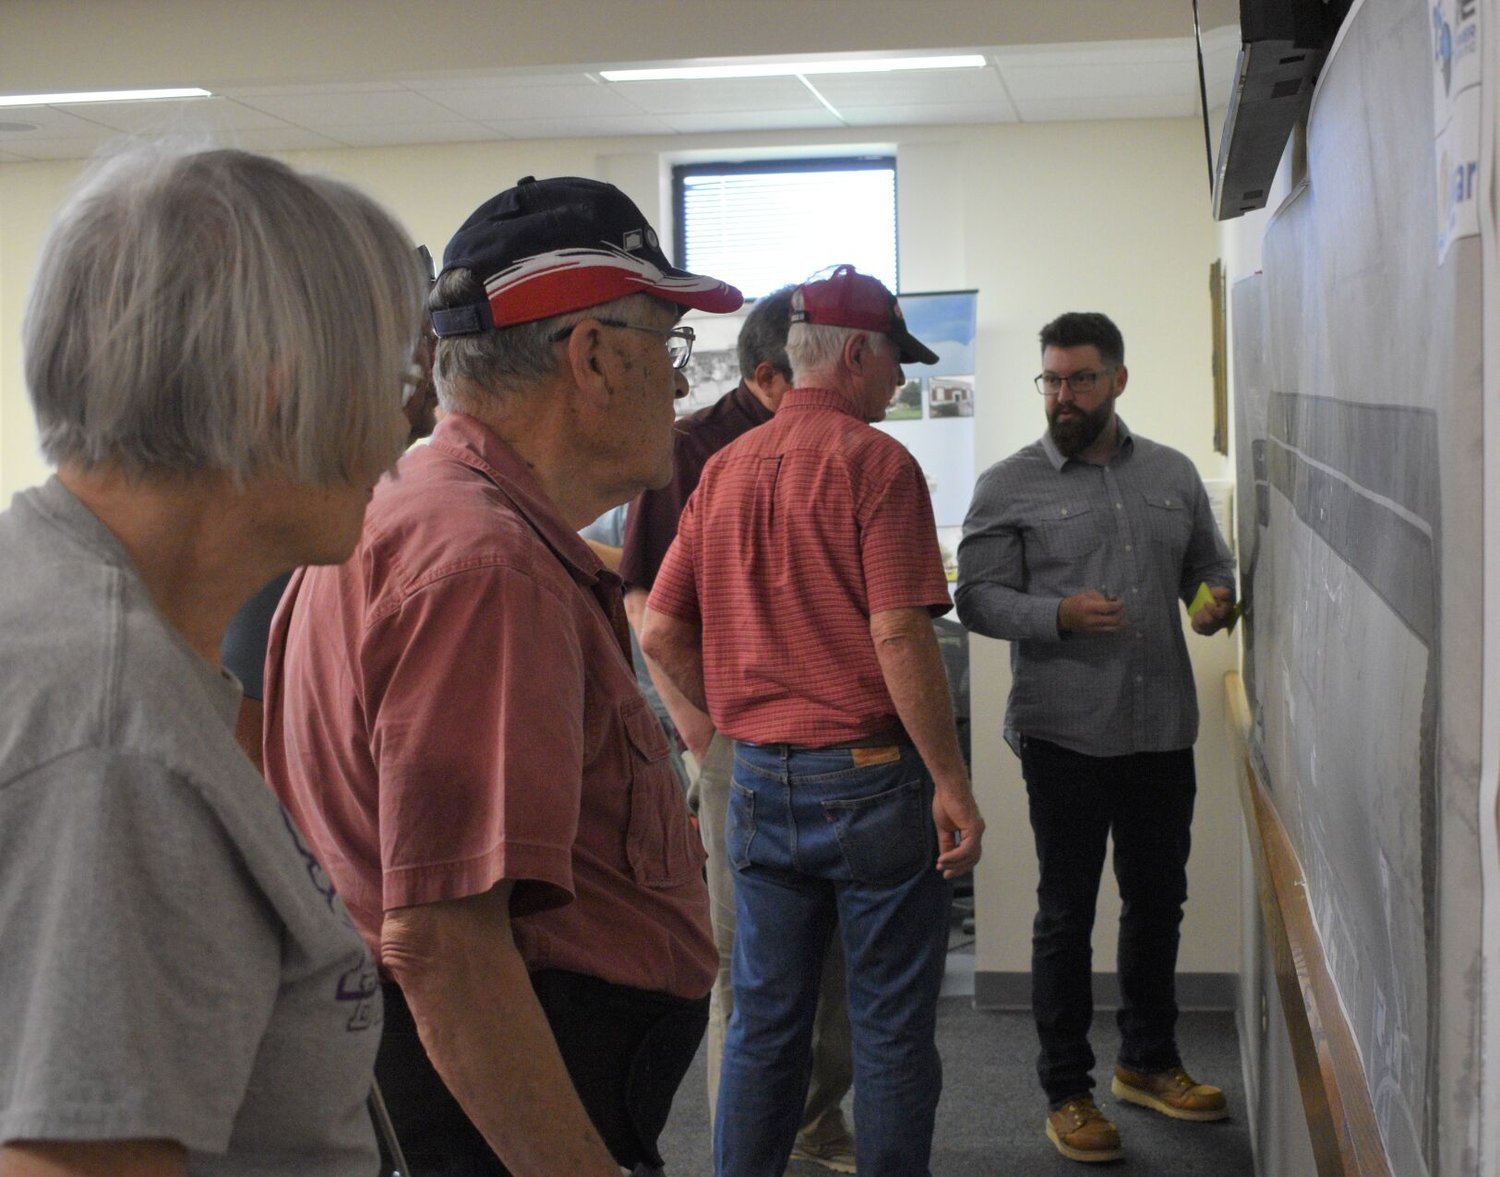 Garen McElroy, Transportation Team Leader with Great River Engineering, at right, speaks with community members during an open house for the East Loop Road project at Bolivar City Hall in June.